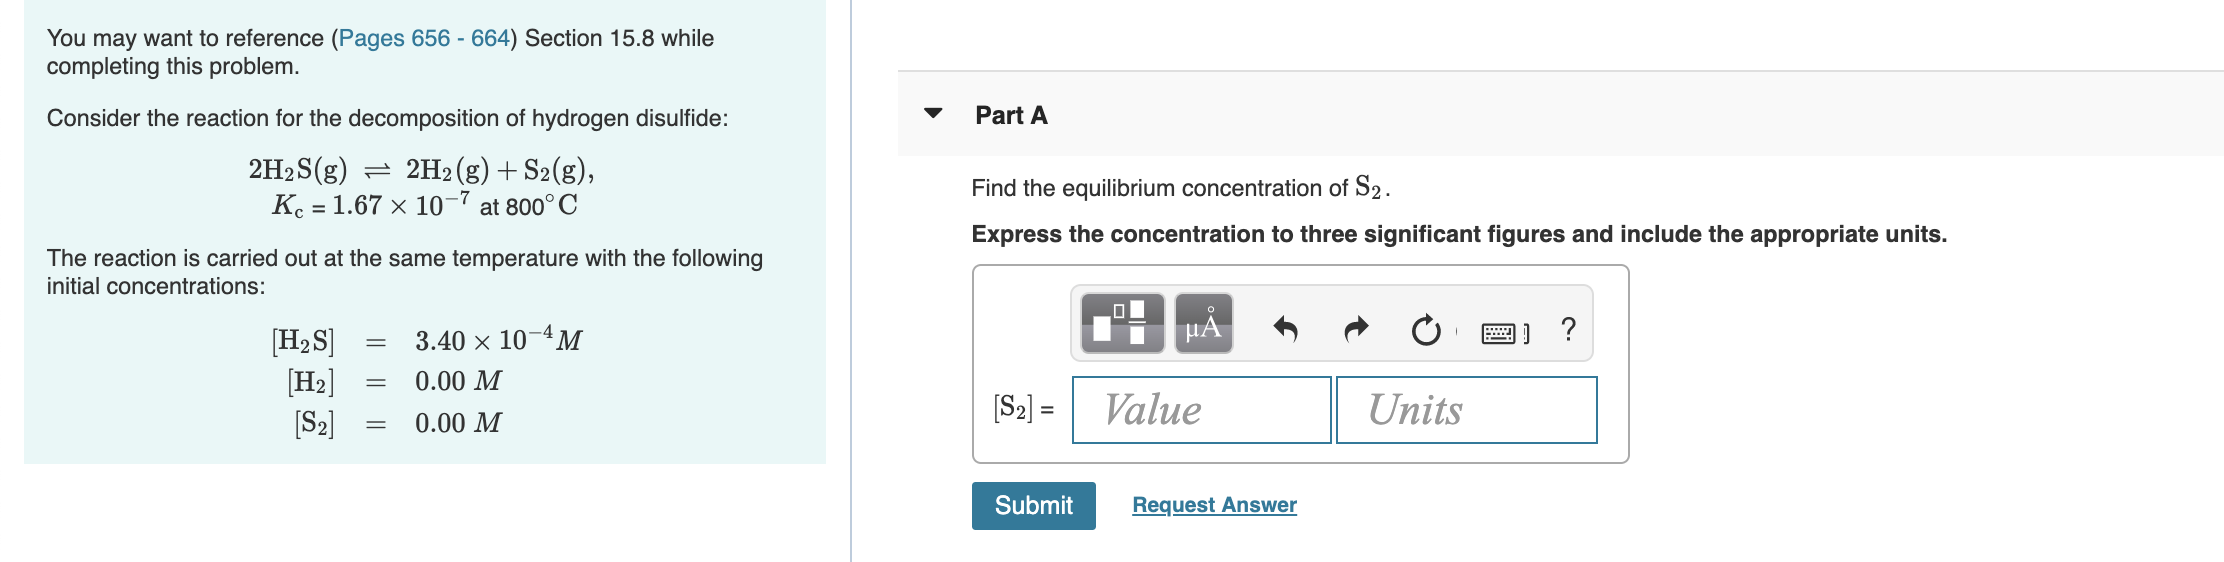 You may want to reference (Pages 656 - 664) Section 15.8 while
completing this problem.
Consider the reaction for the decomposition of hydrogen disulfide:
Part A
2H2S(g) = 2H2 (g) + S2(g),
Find the equilibrium concentration of S2.
Express the concentration to three significant figures and include the appropriate units.
Kc = 1.67 x 10-7 at 800° C
The reaction is carried out at the same temperature with the following
initial concentrations:
HẢ
[H2S]
[H2]
[S2]
3.40 × 10-4M
0.00 M
[S2] =
Value
Units
%3D
0.00 M
Submit
Request Answer
